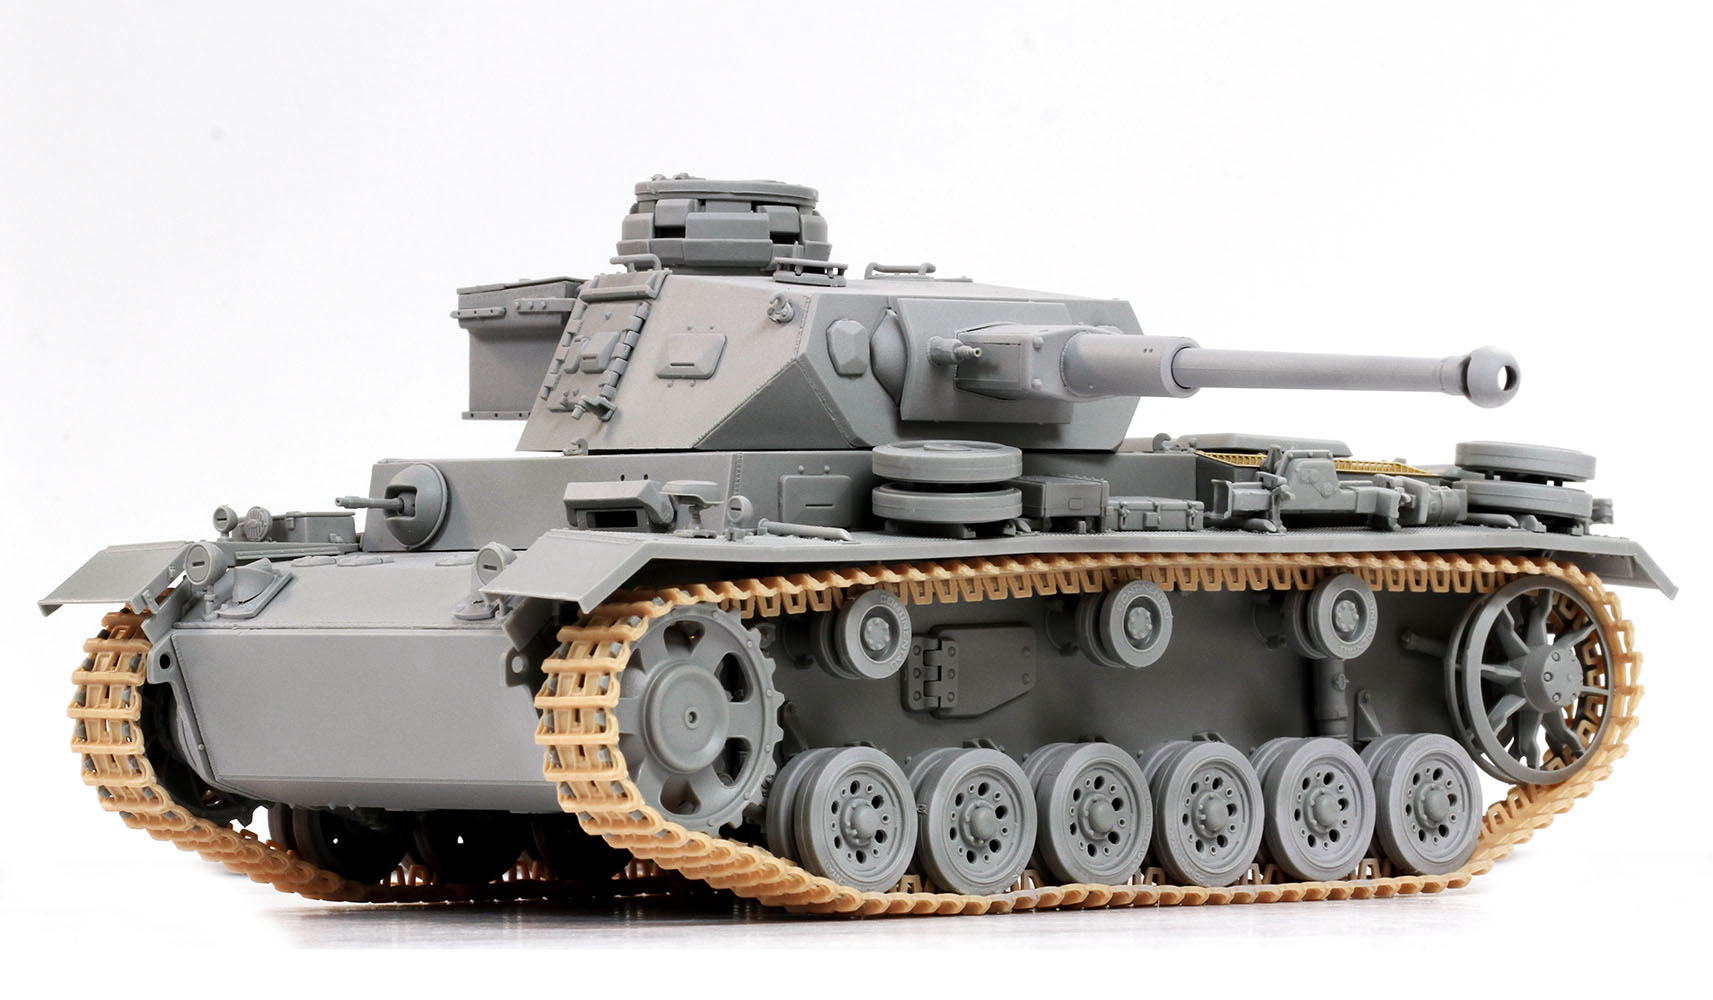 Dragon 1/35 Scale Pz.Kpfw.III Ausf.K Clear Parts from Kit No 6903 